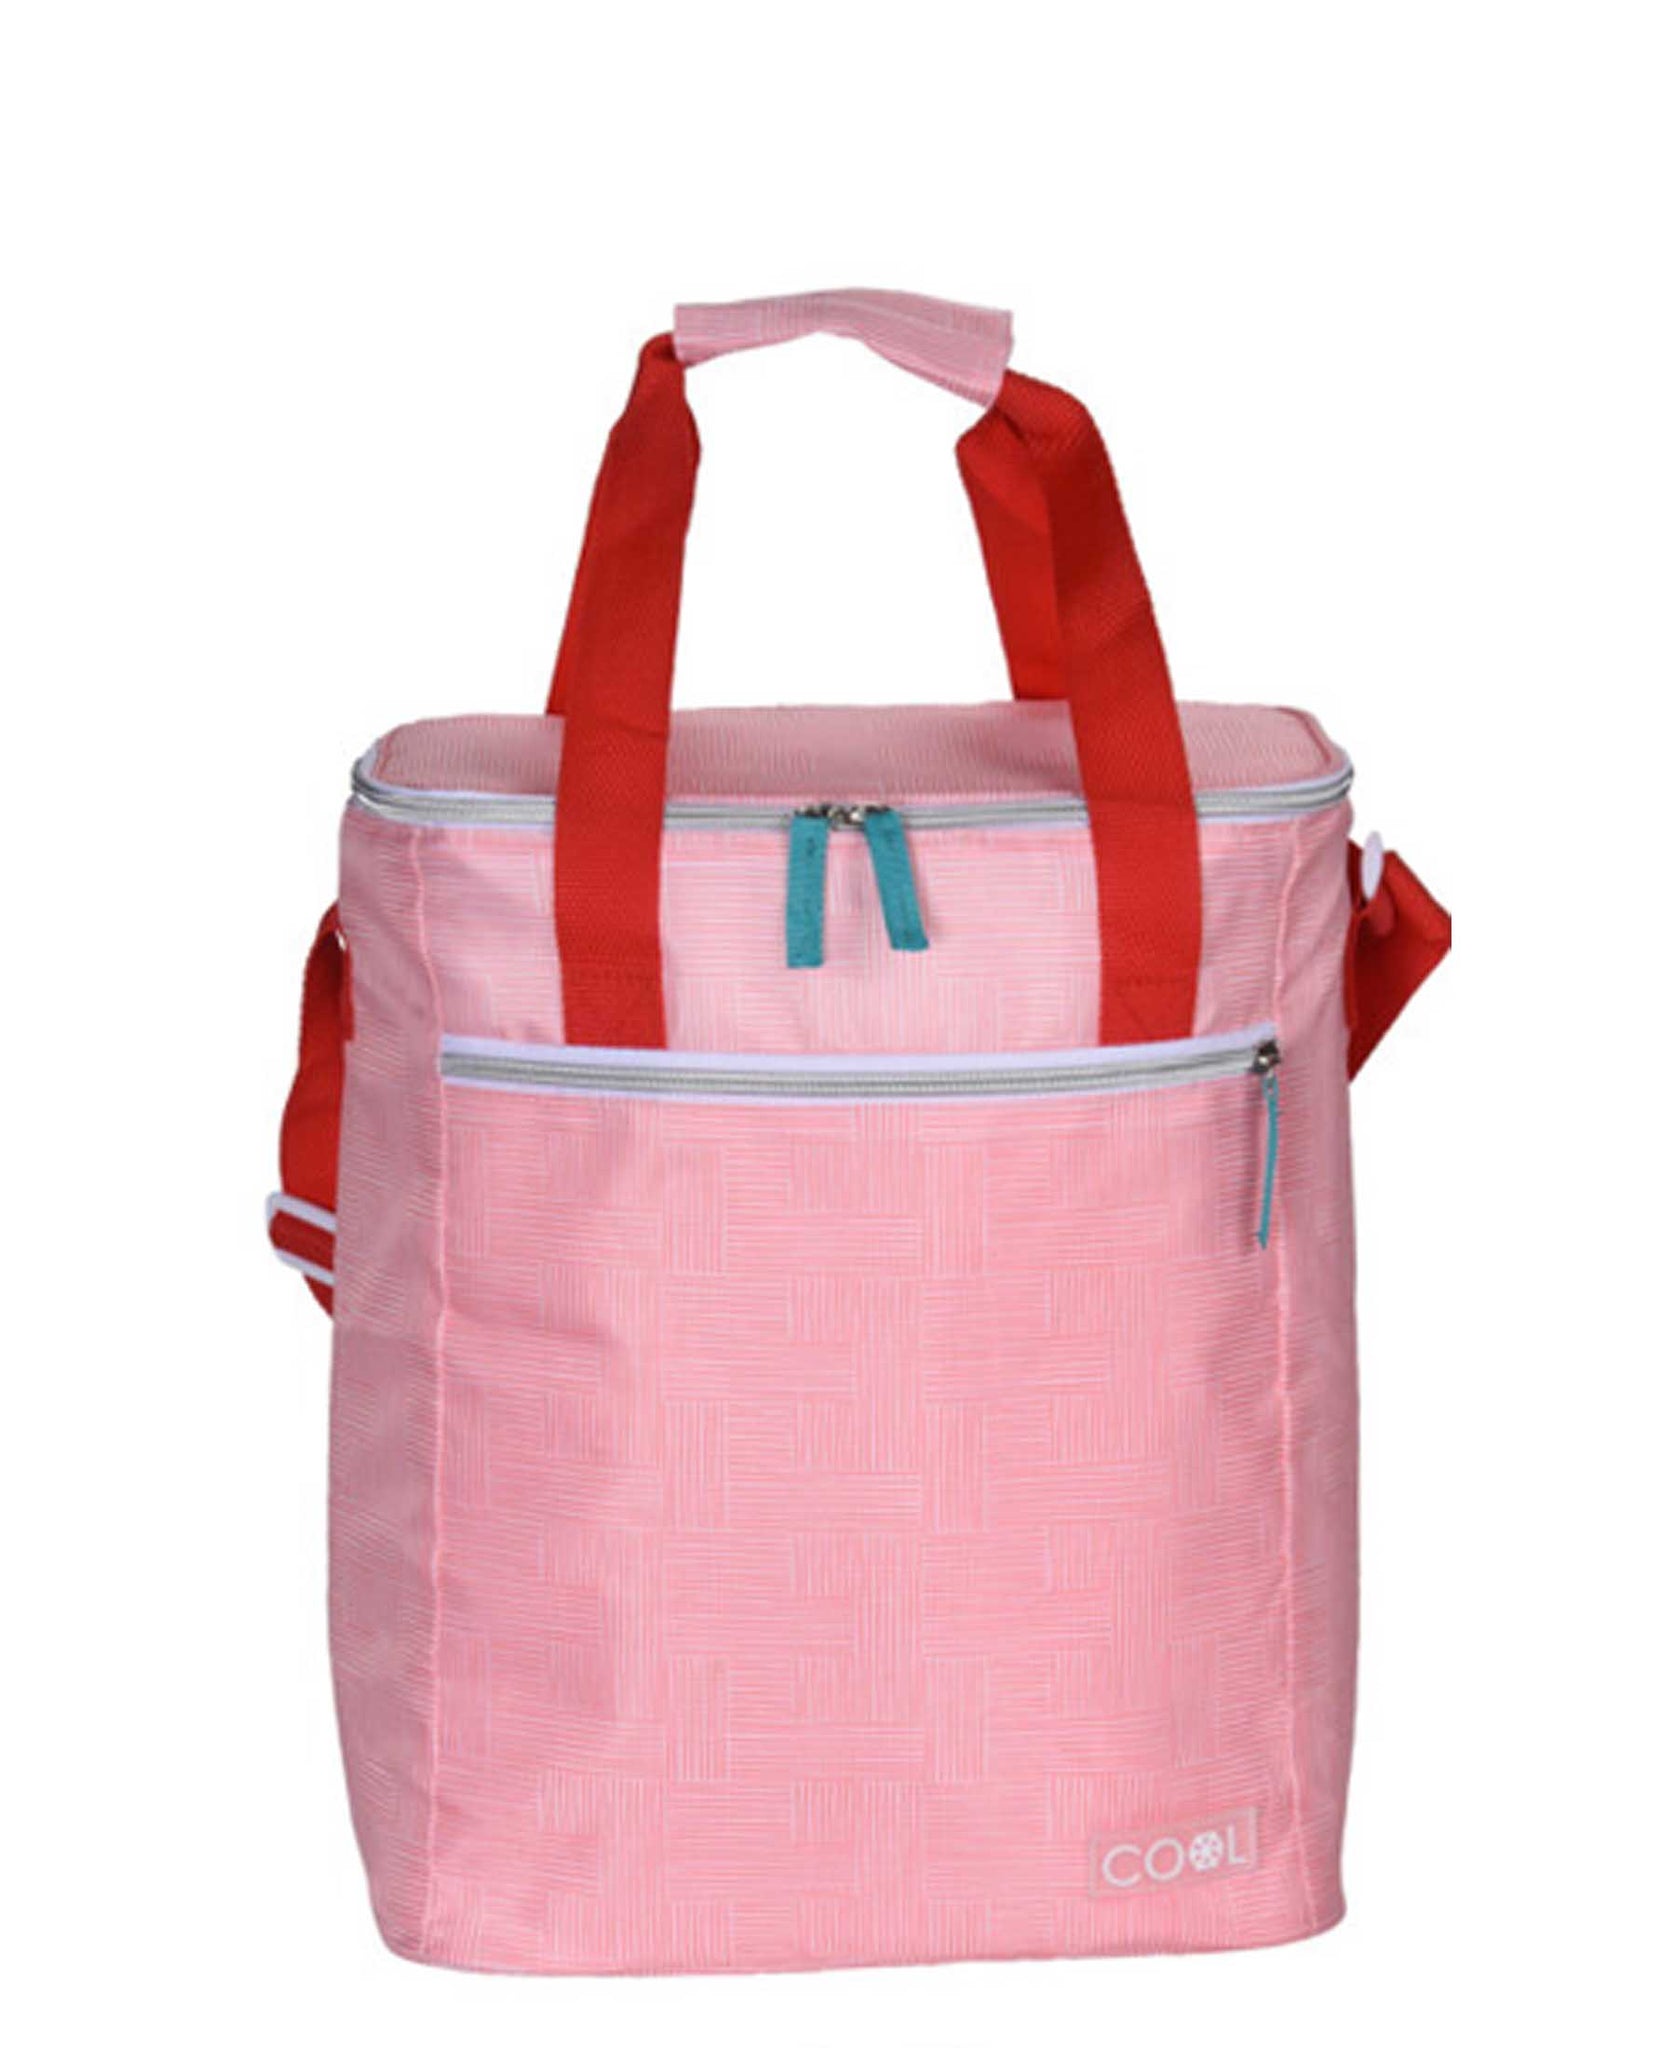 Kitchen Life 16L Cooler Bag With Graphic Print - Pink